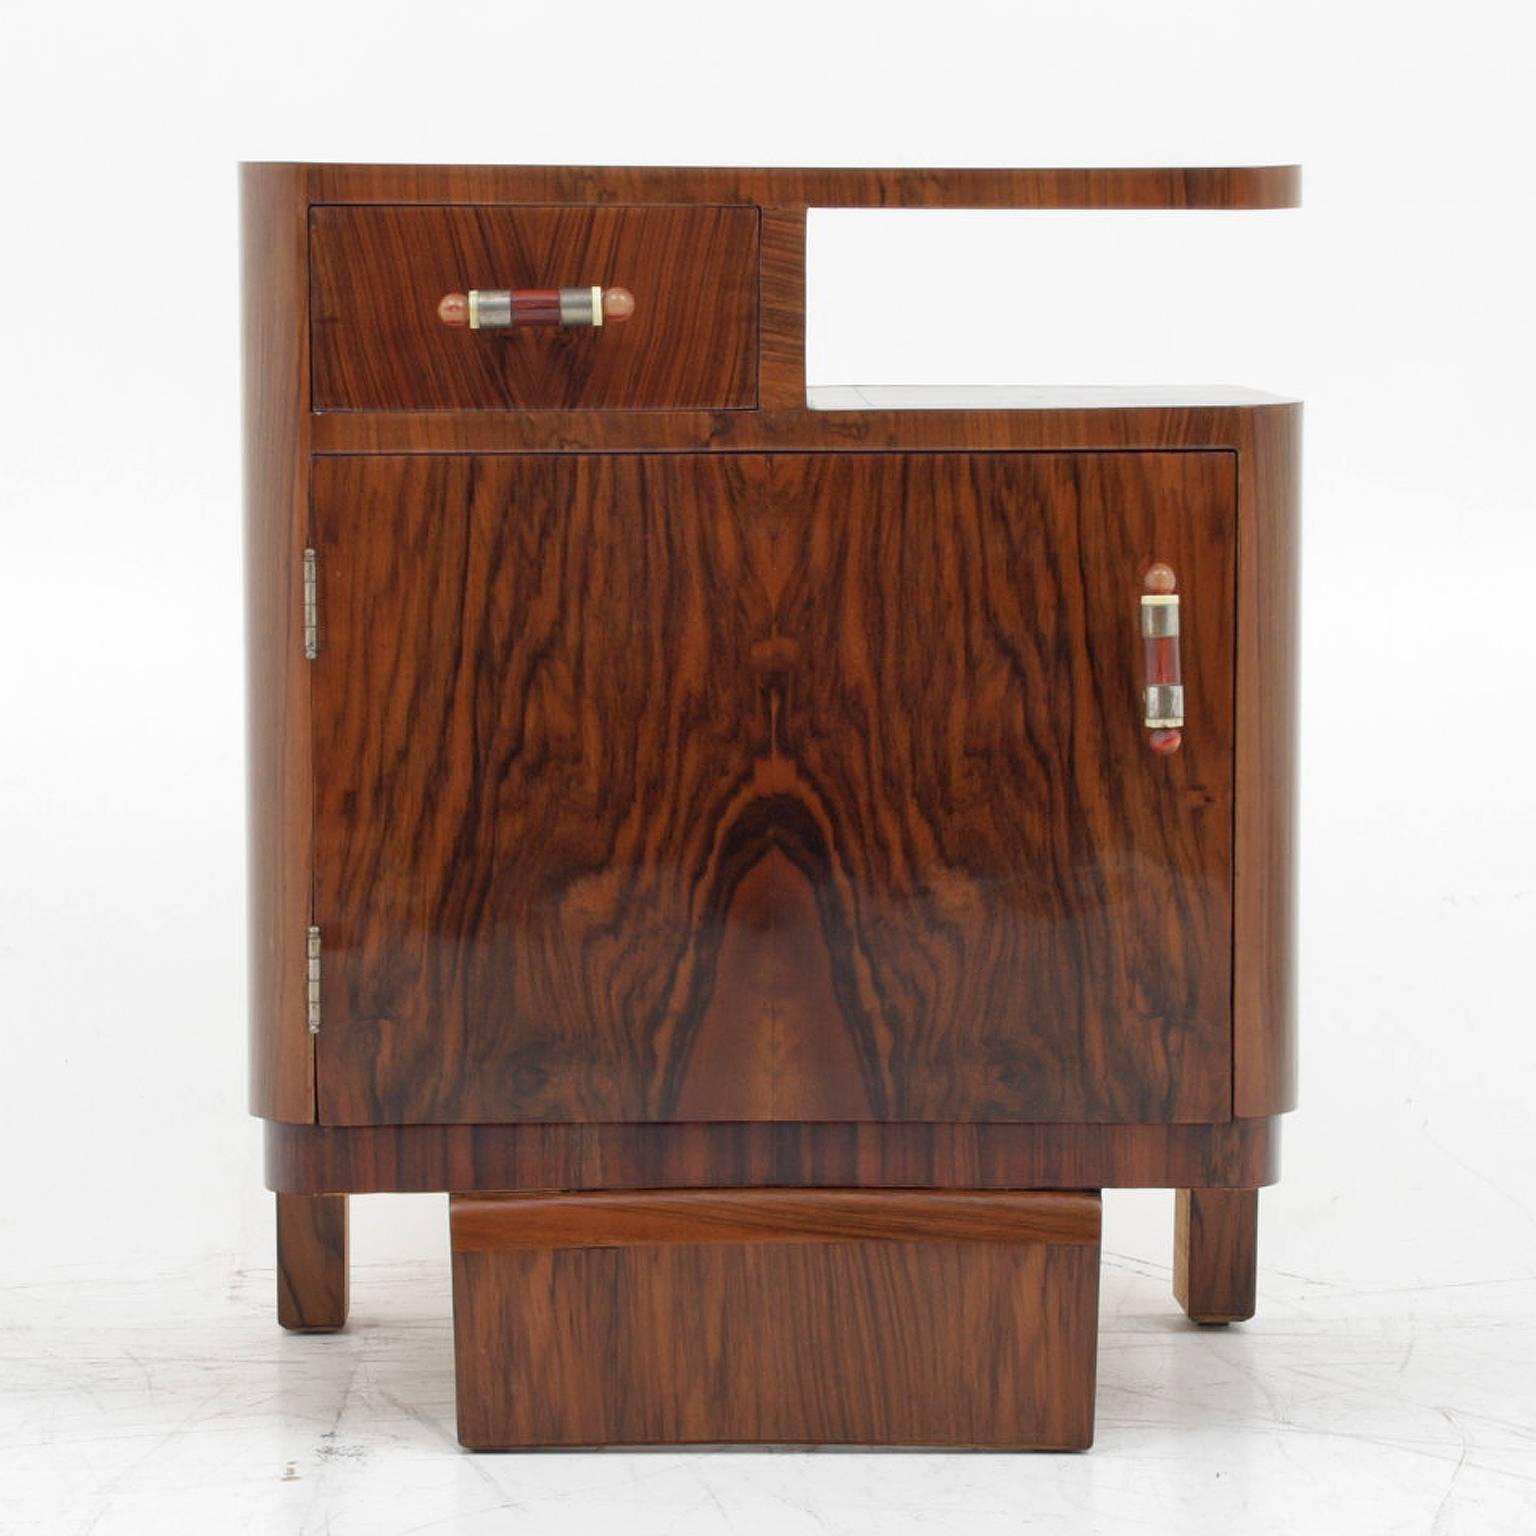 Two Art Deco bedside tables which have been formed to mirror each other. They stand on three legs, with the front one being wider than the other two. The tables have one small drawer at the top and in the middle of the body they have a larger